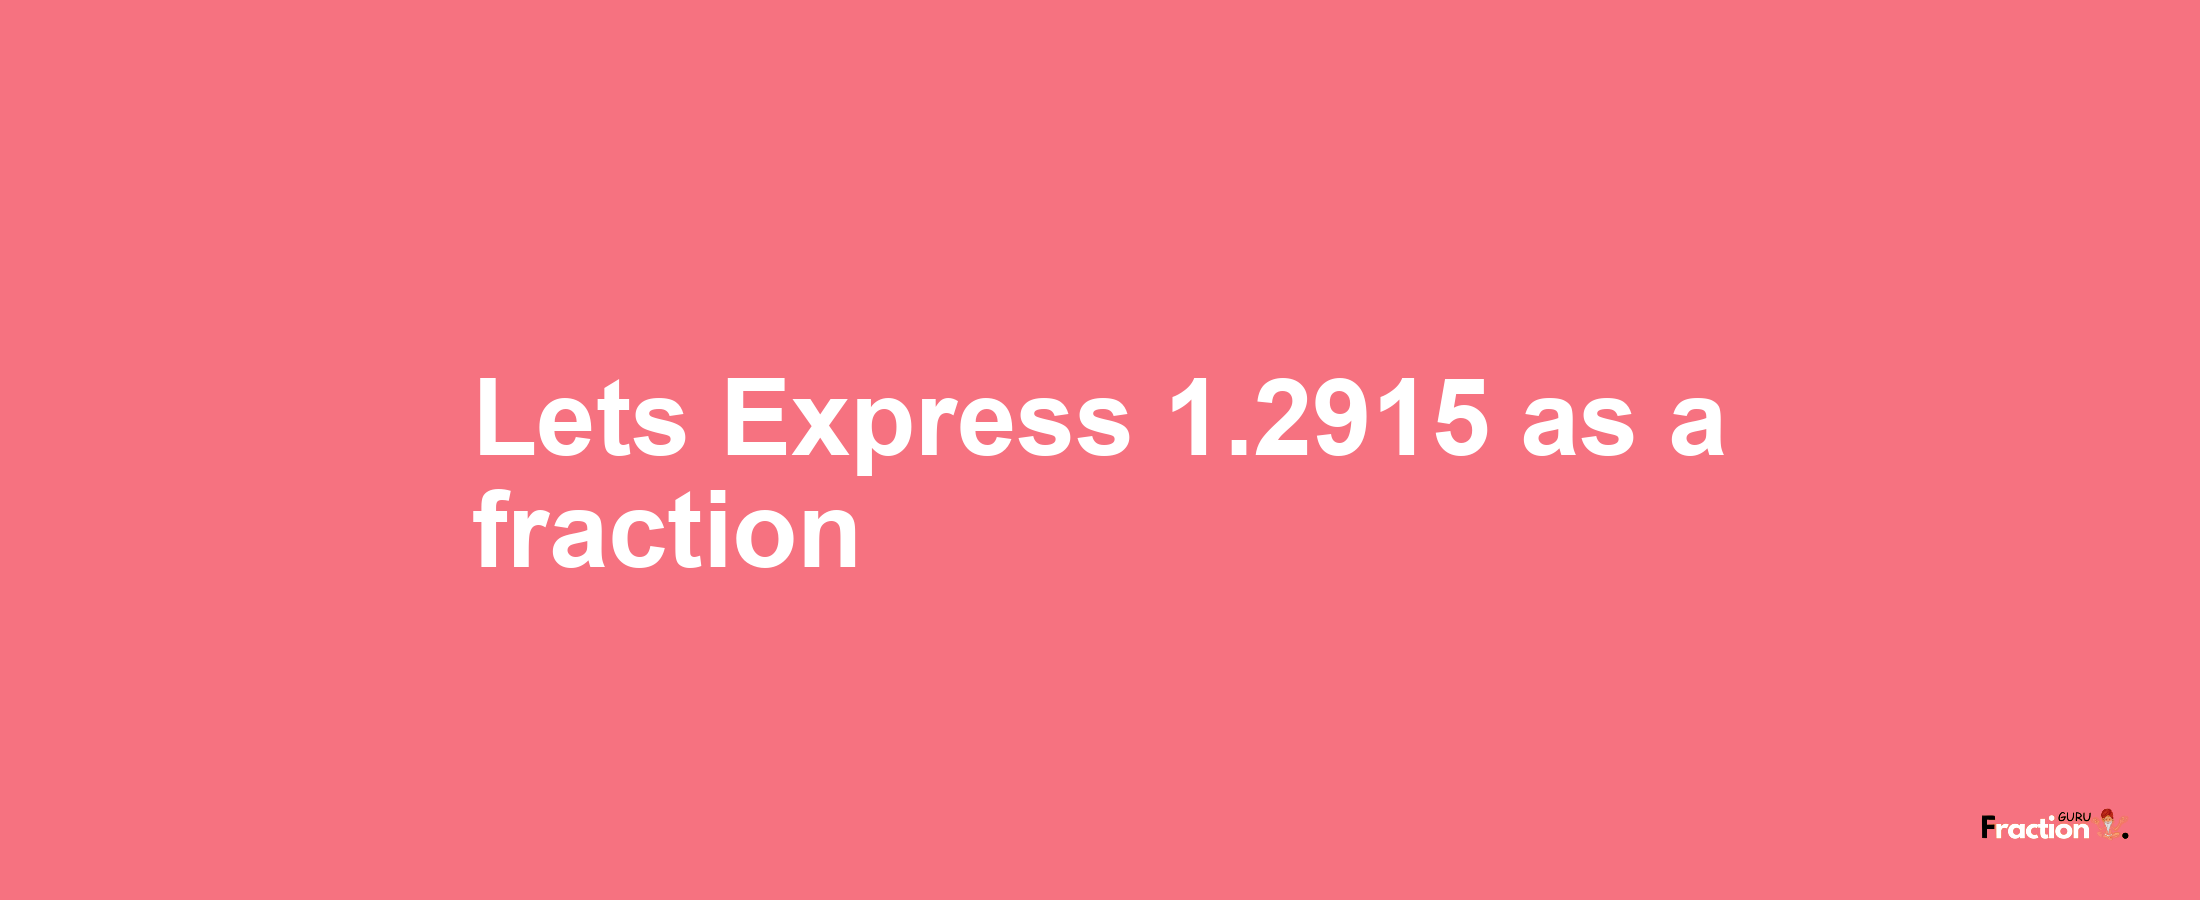 Lets Express 1.2915 as afraction